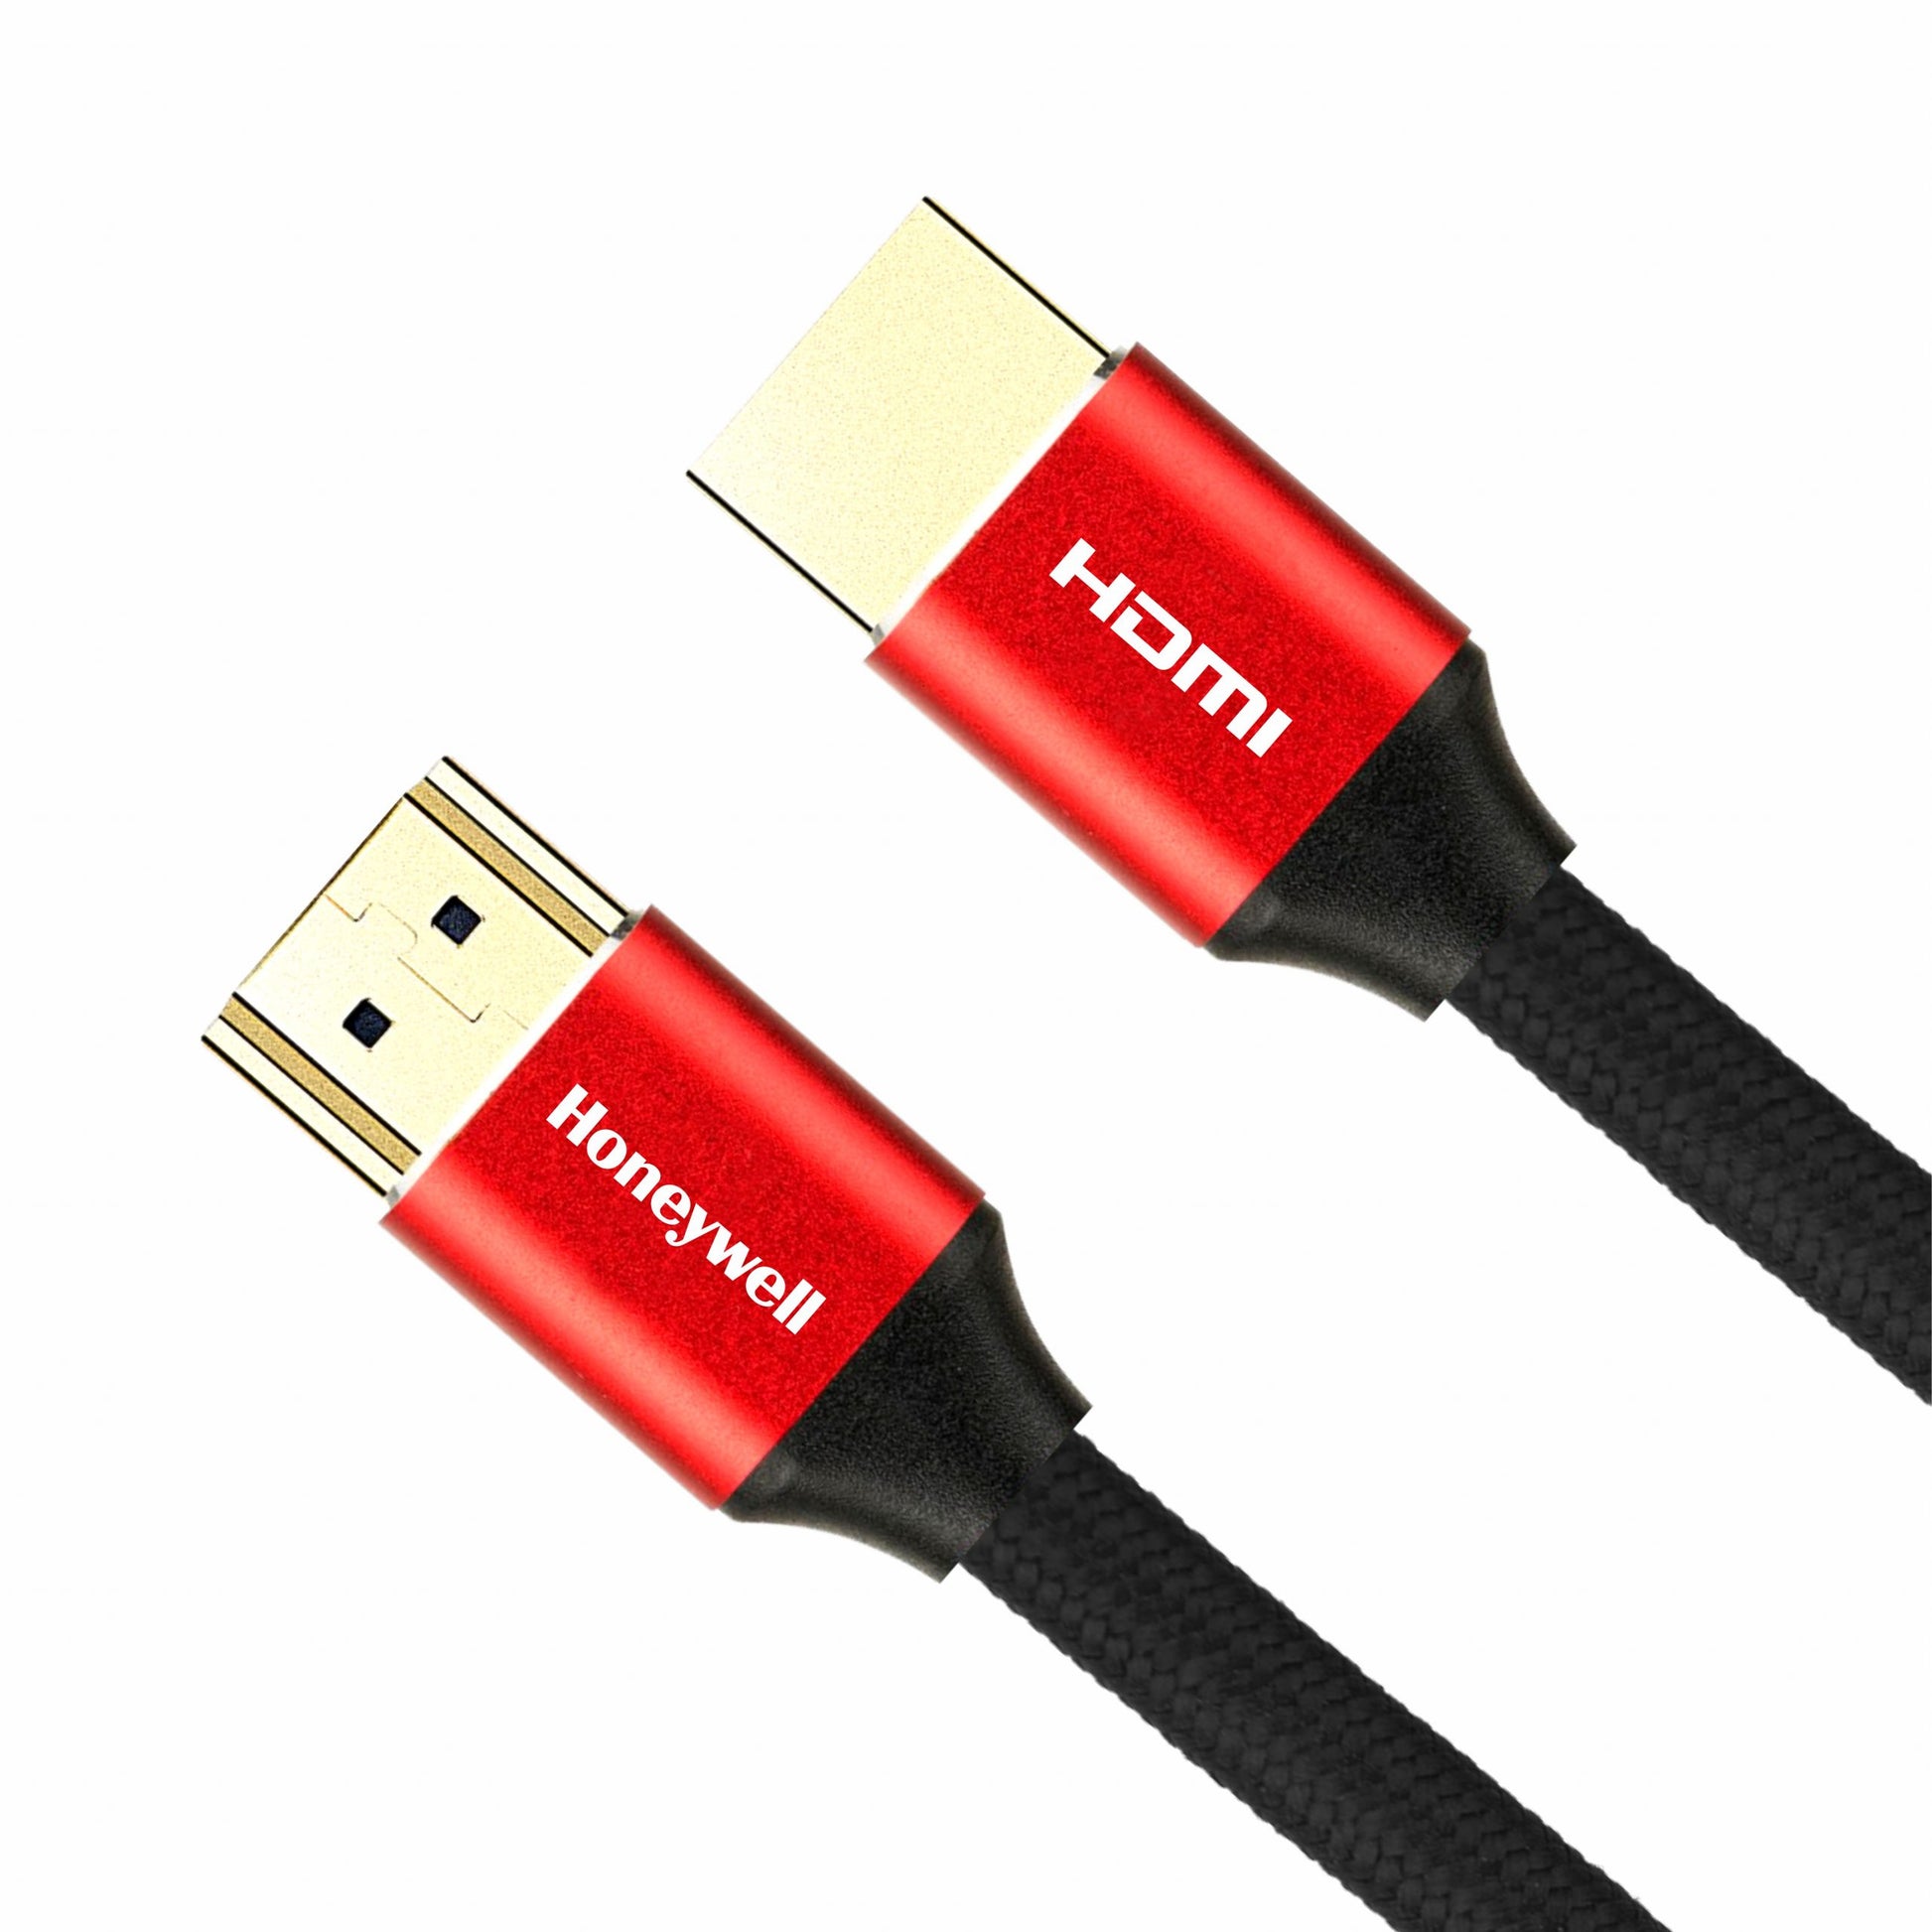 Honeywell 8K Ultra High Speed HDMI Ver 2.1 Cable with ethernet-3M-HDMI Cable-Honeywell-computerspace